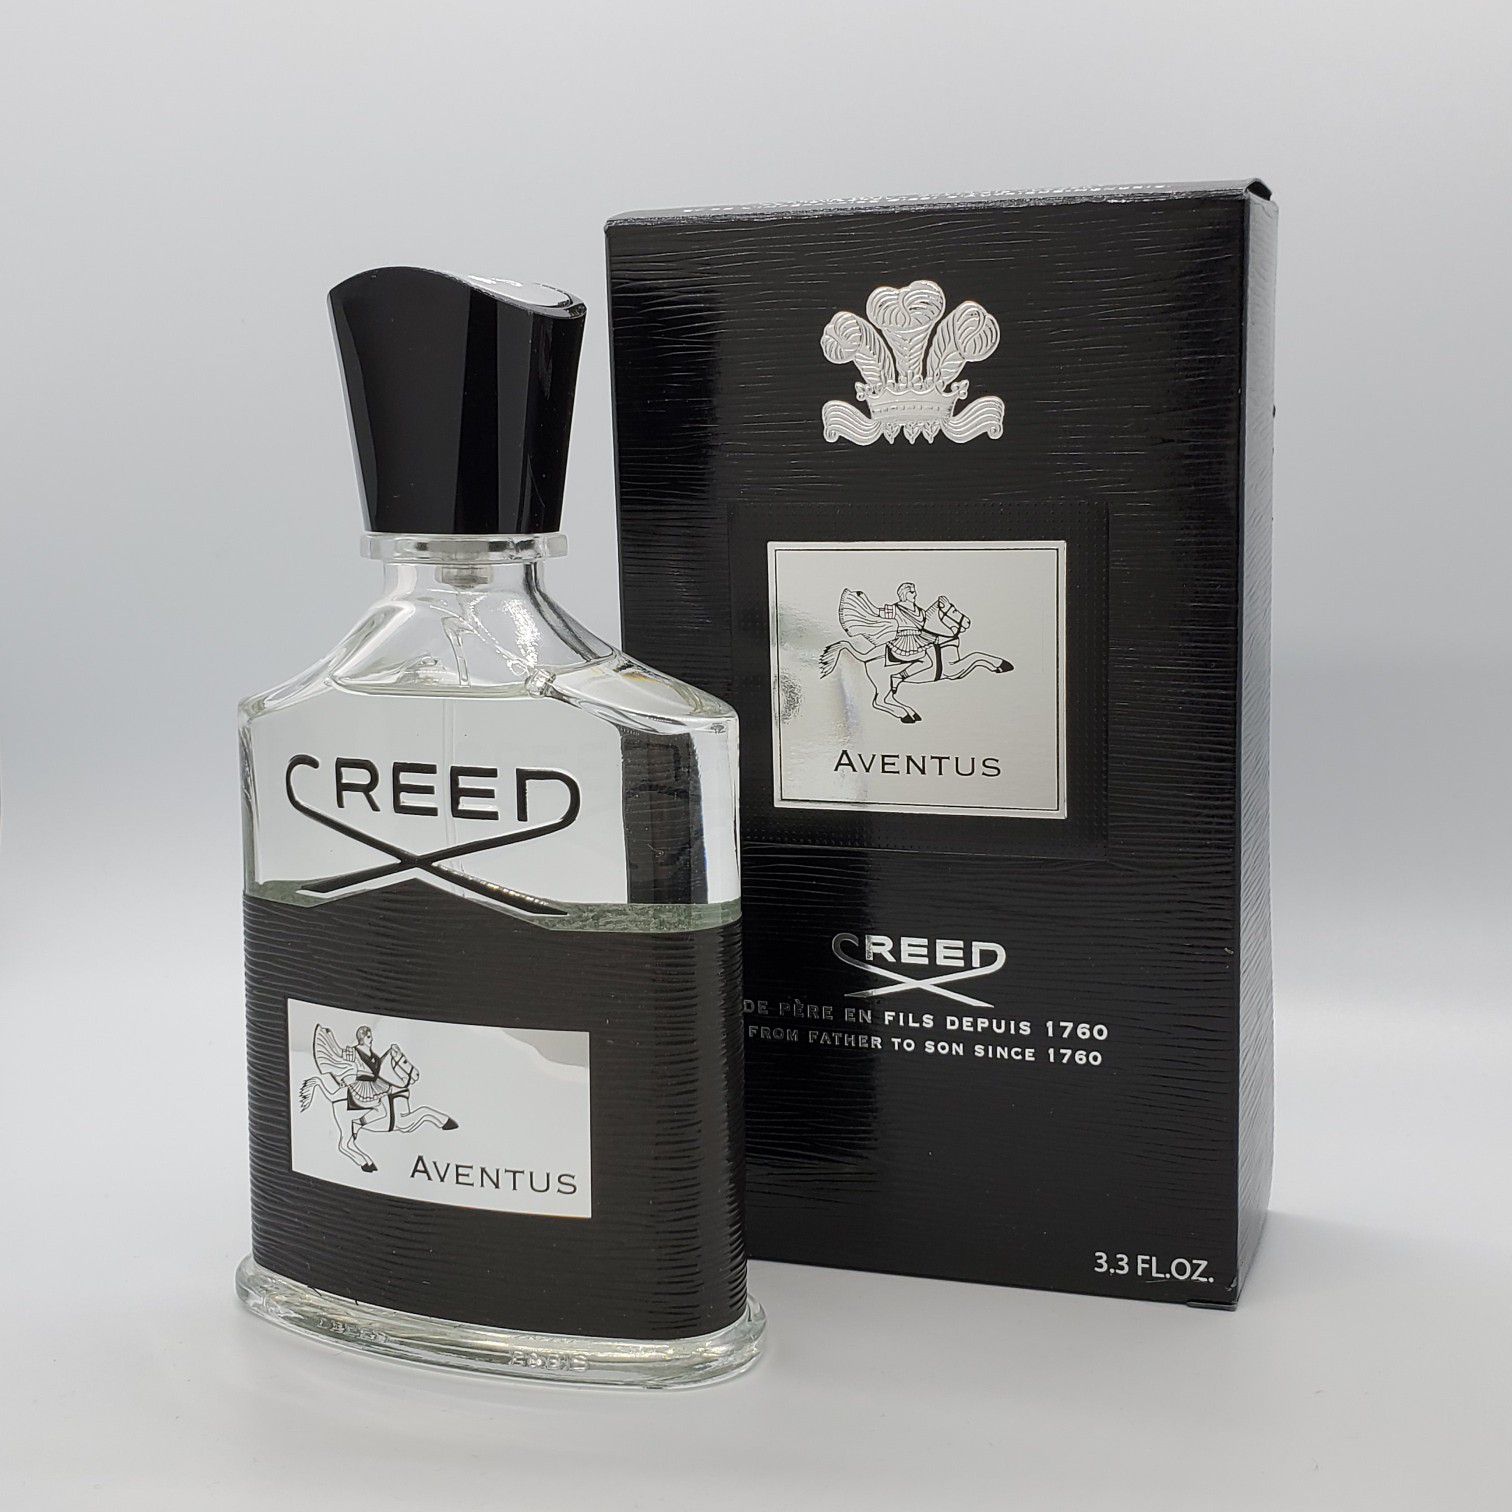 New 1000% authentic creed aventus cologne perfume fragrance